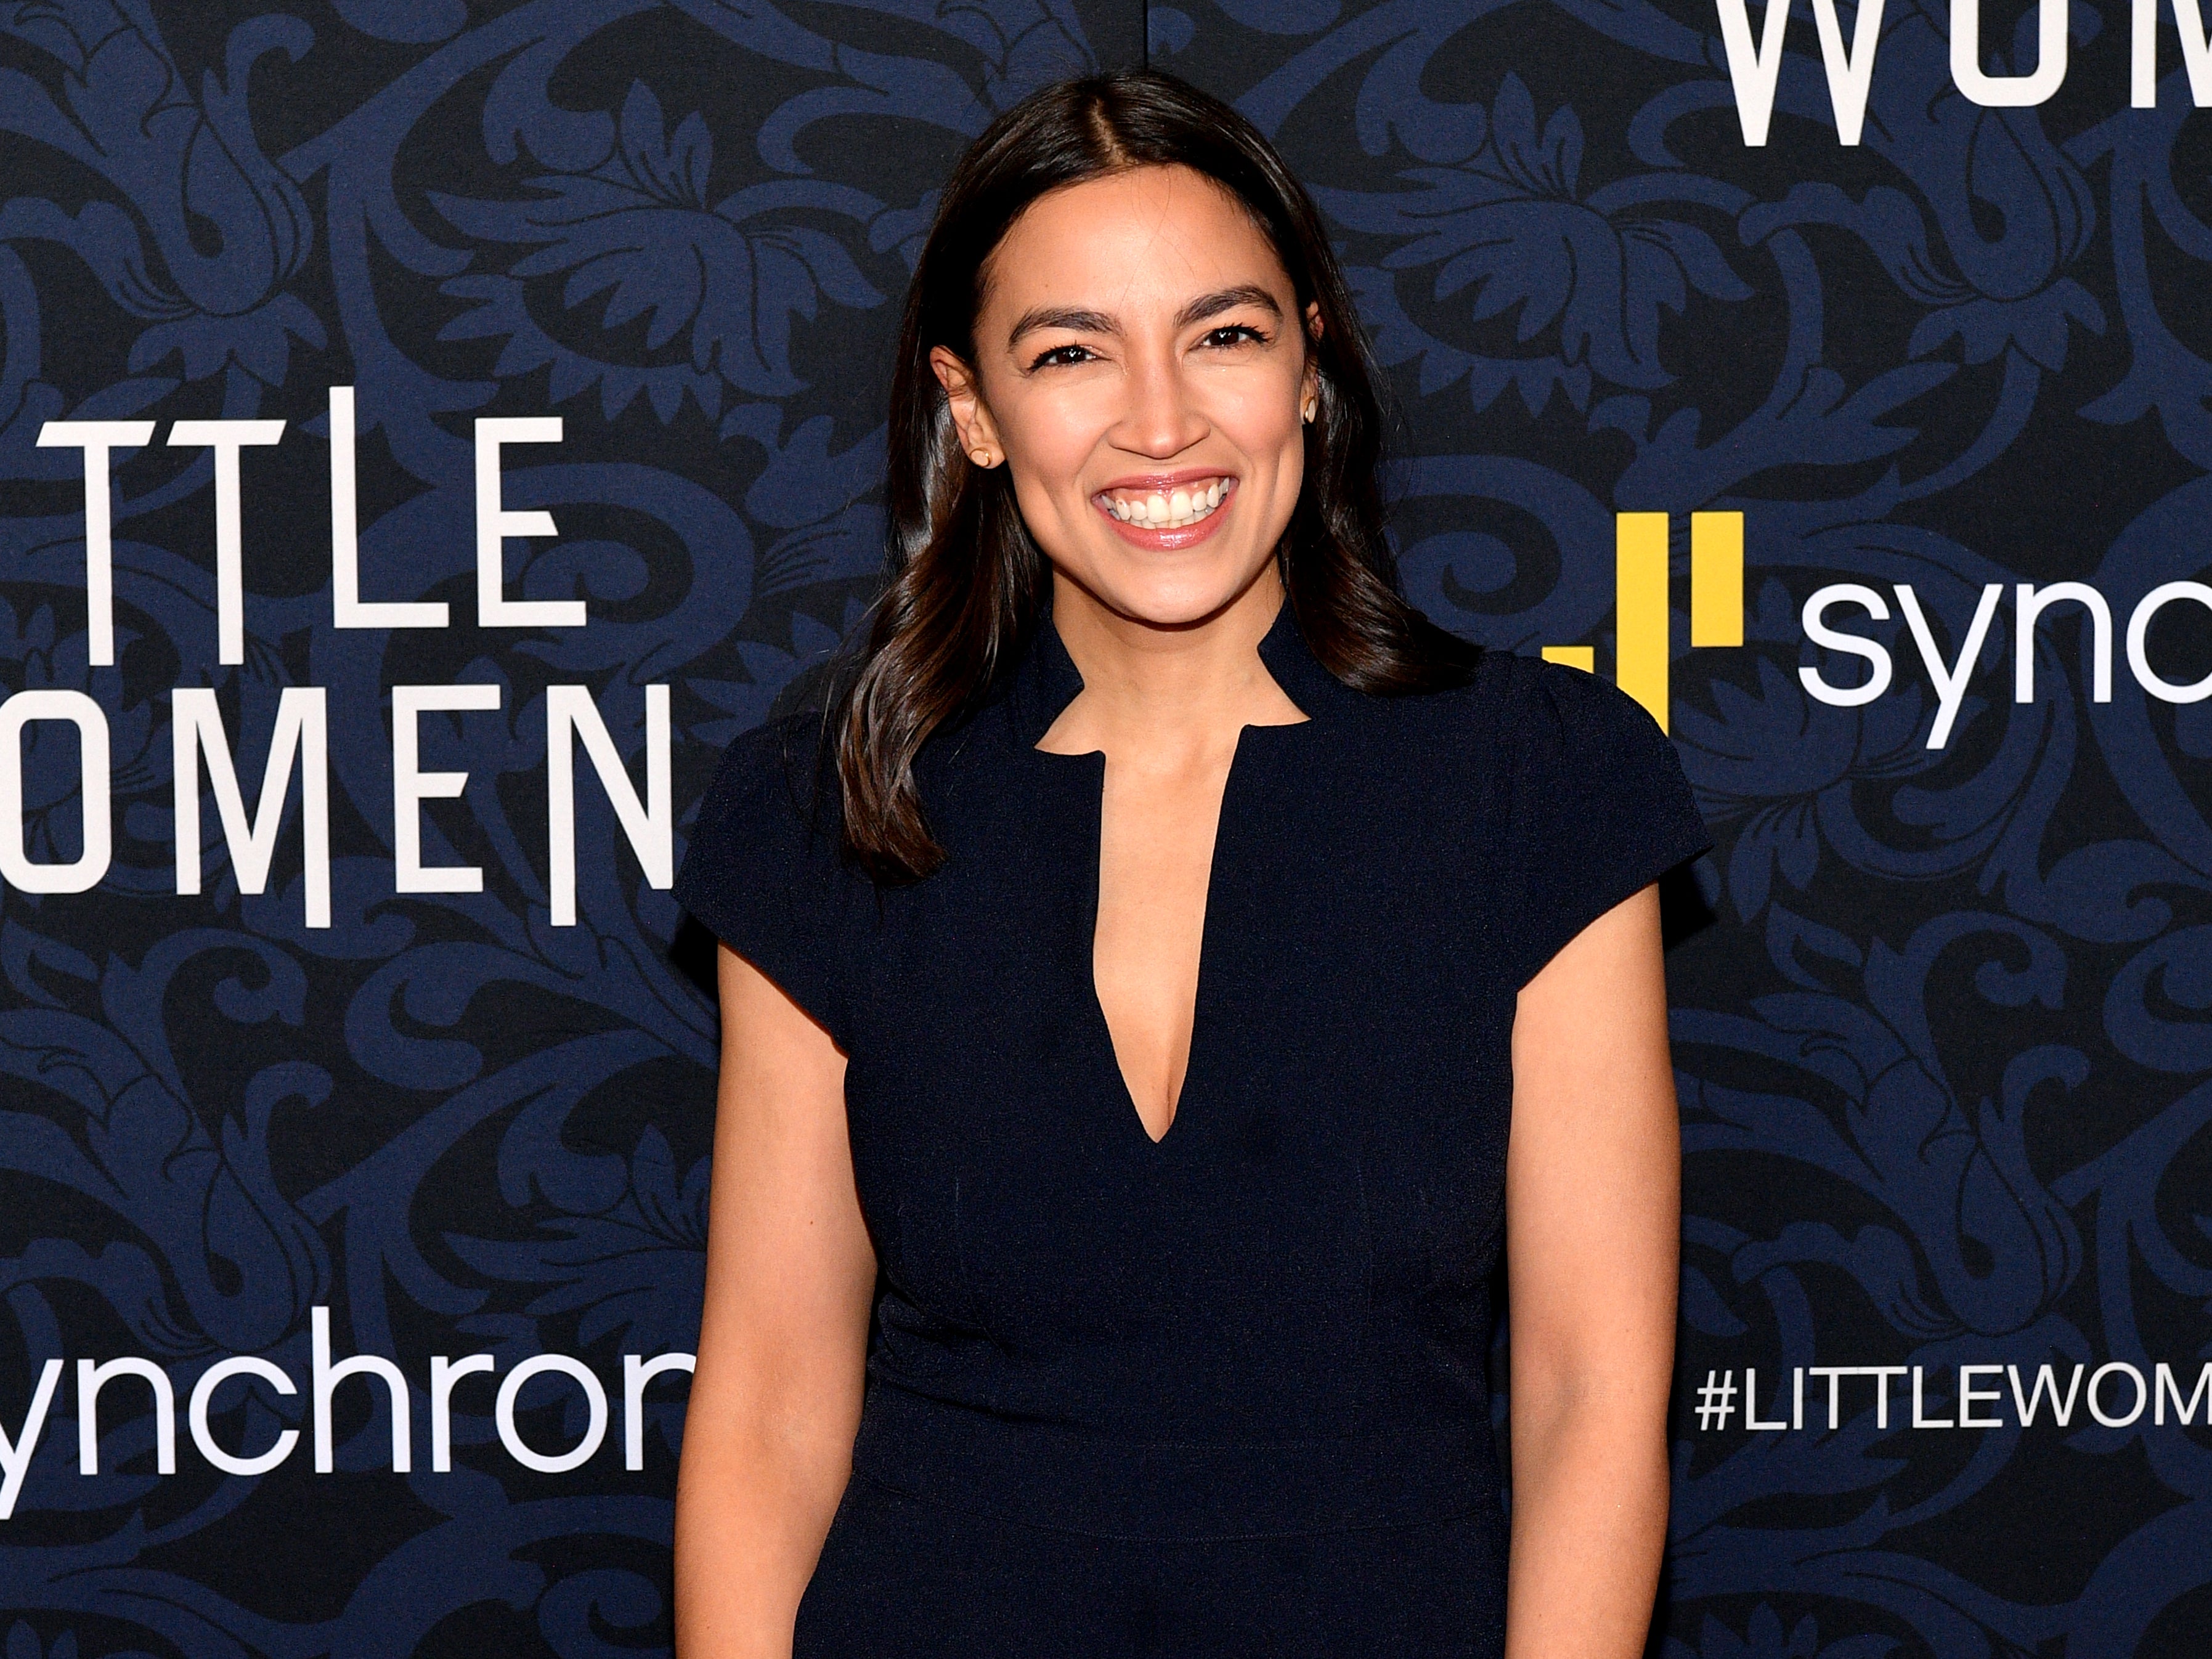 Alexandria Ocasio-Cortez says she is thinking about freezing her eggs